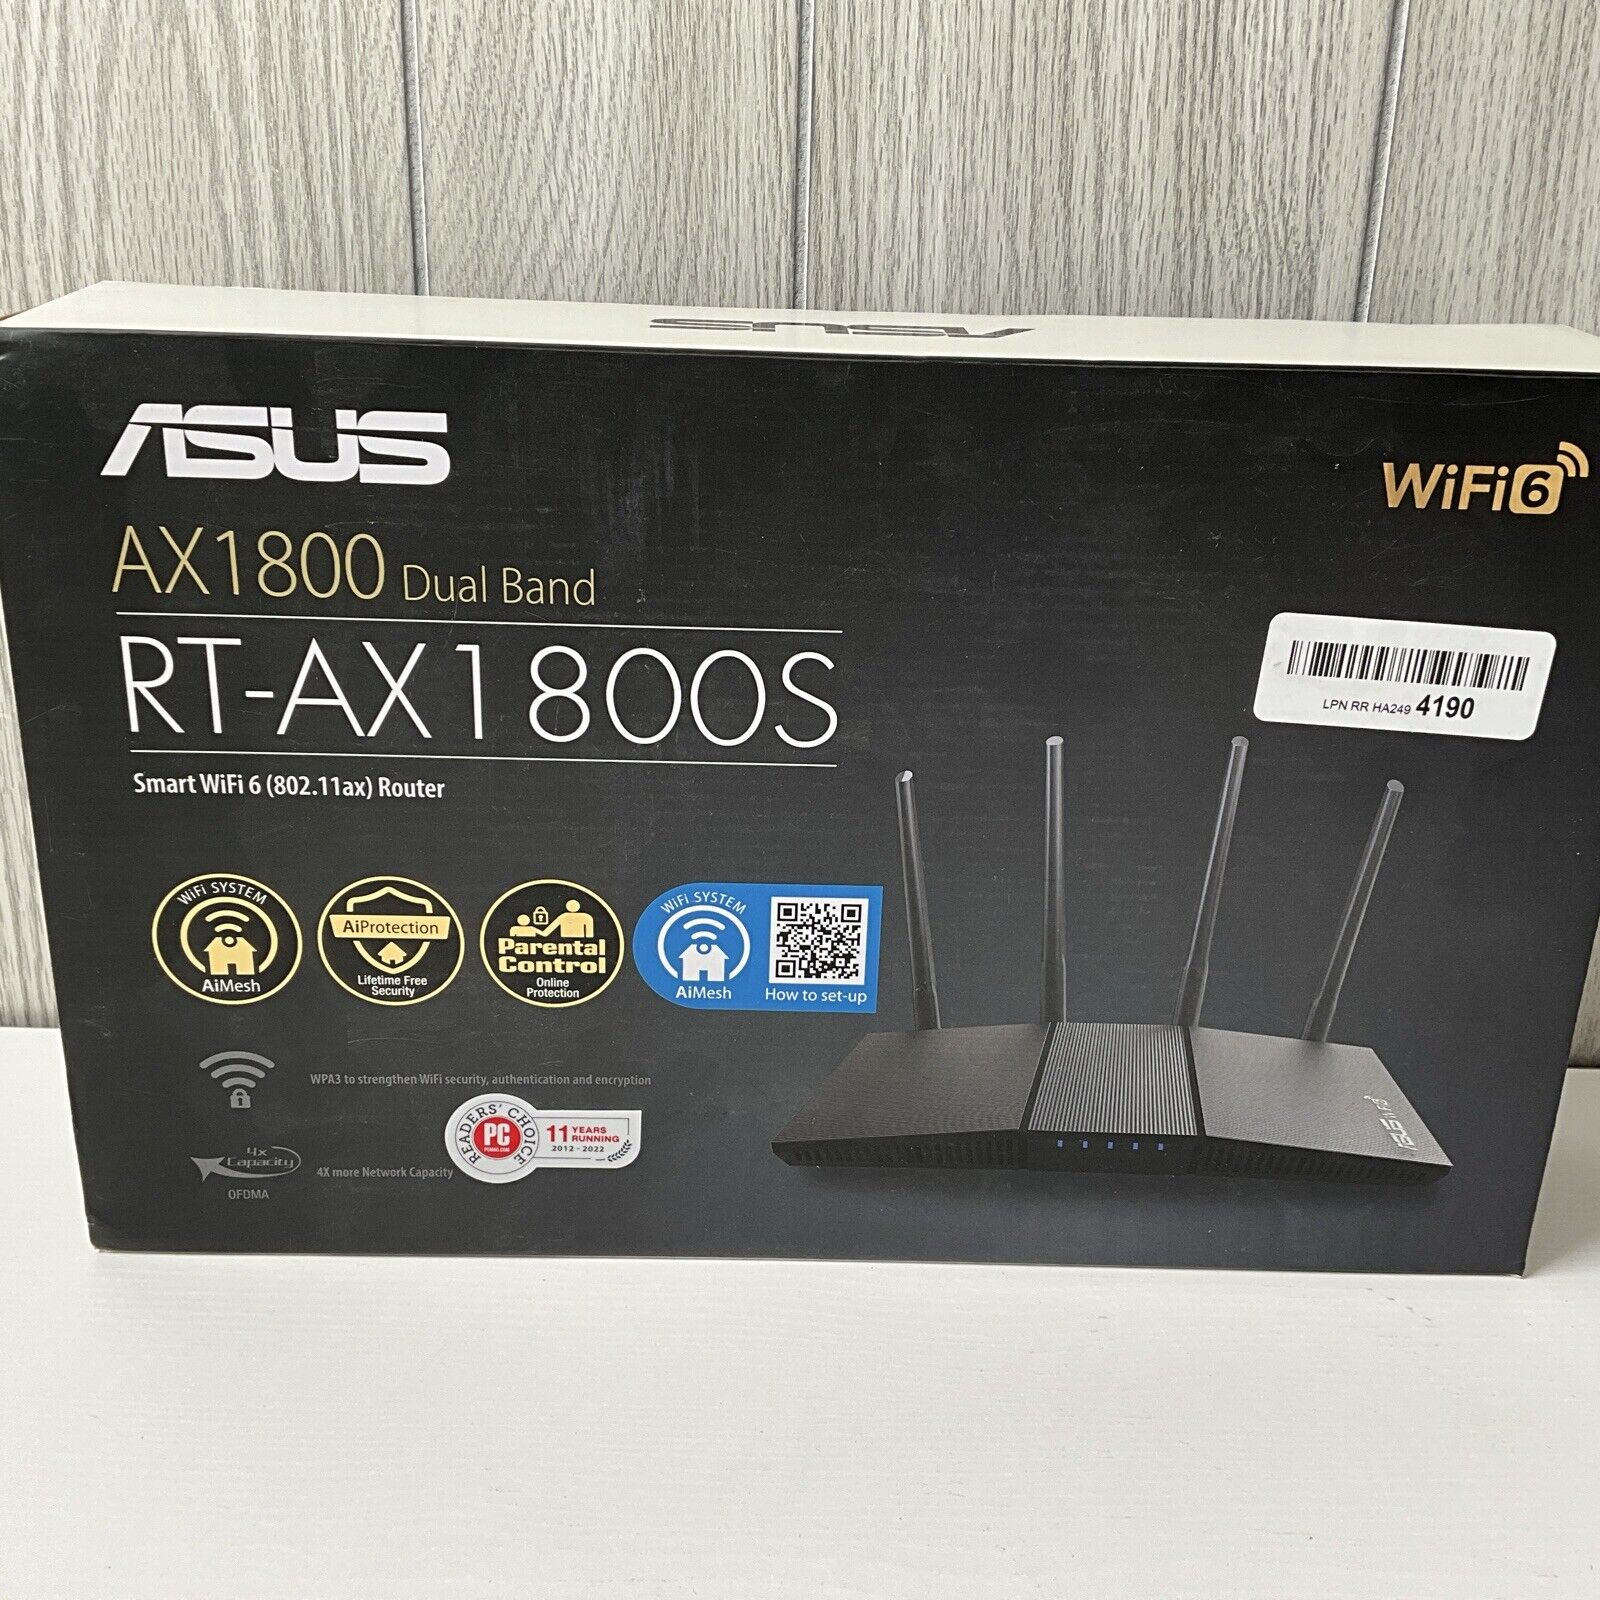 Asus RT-AX1800S Dual Band Smart Wifi 6 Router New Open Box